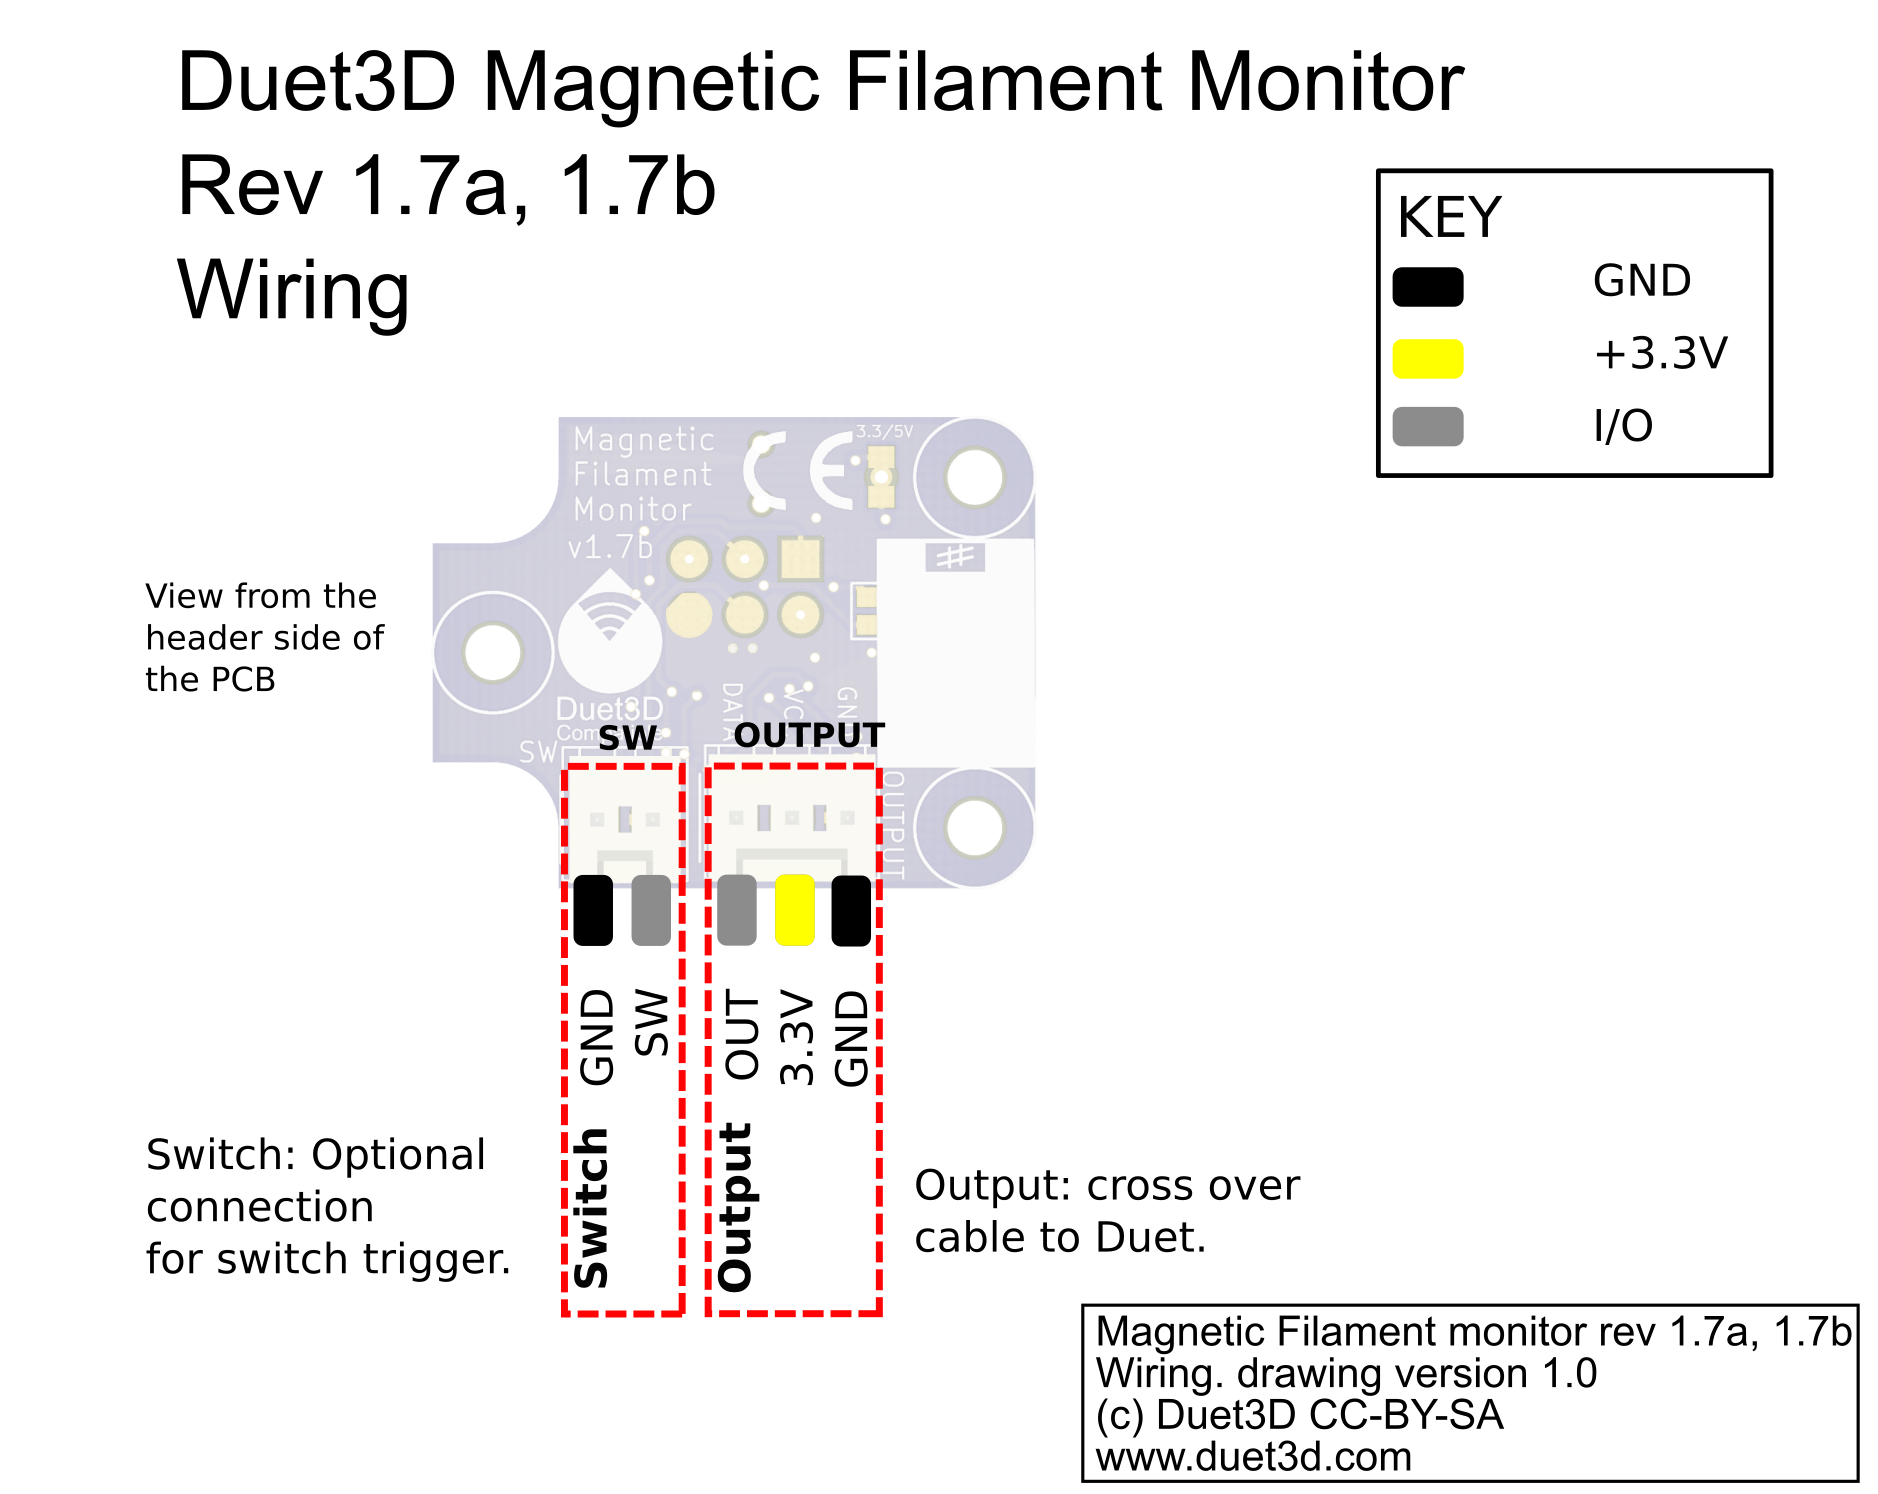 Wiring for the Rotating Magnet Filament monitor version 1.7a and v1.7b